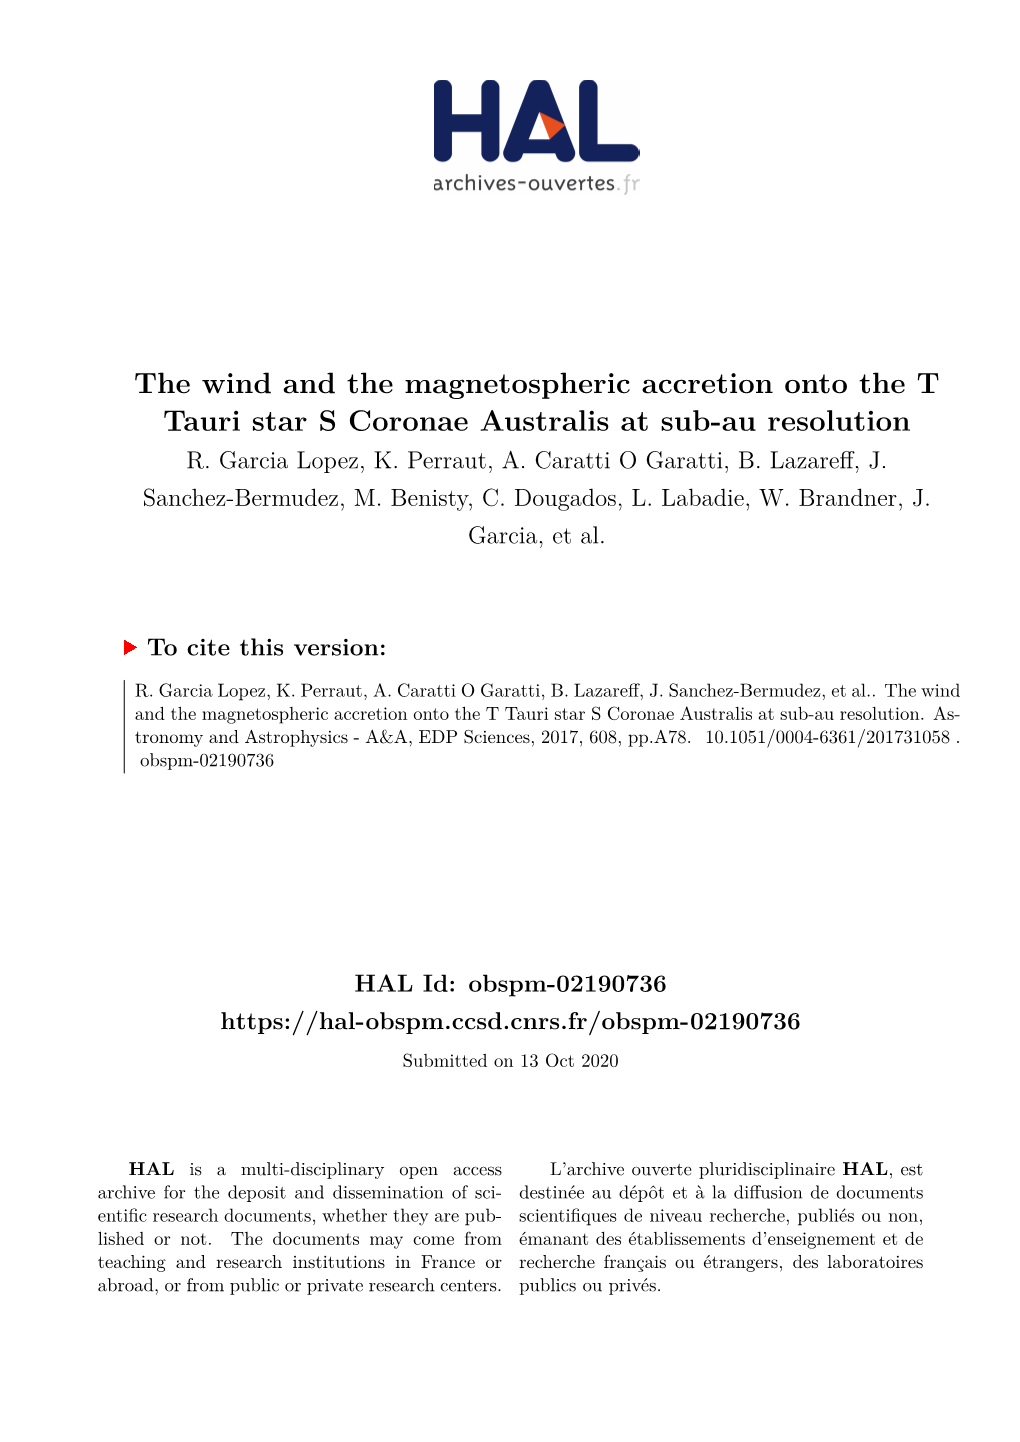 The Wind and the Magnetospheric Accretion Onto the T Tauri Star S Coronae Australis at Sub-Au Resolution R